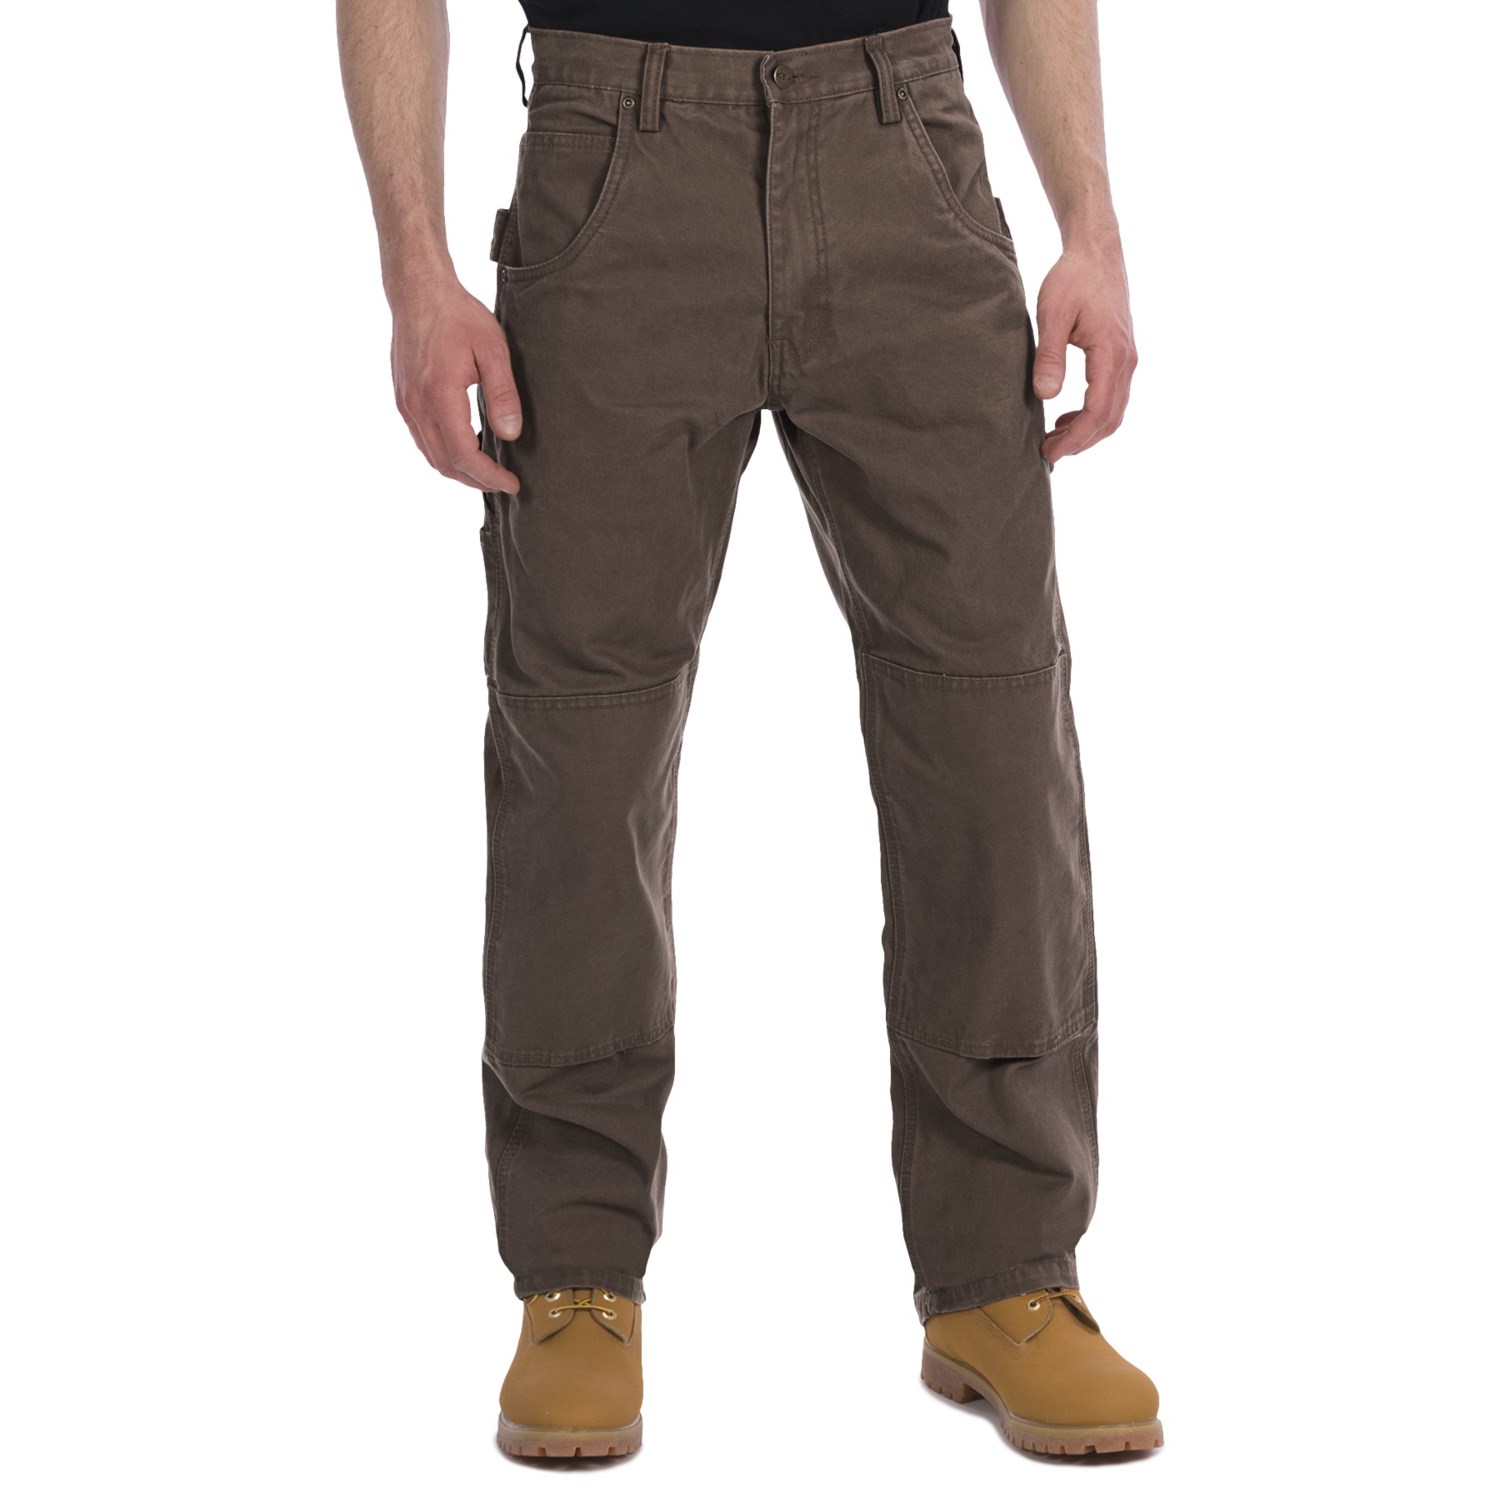 Lakin Mckey Canvas Duck Dungaree Work Pants - Relaxed Fit (For Men ...